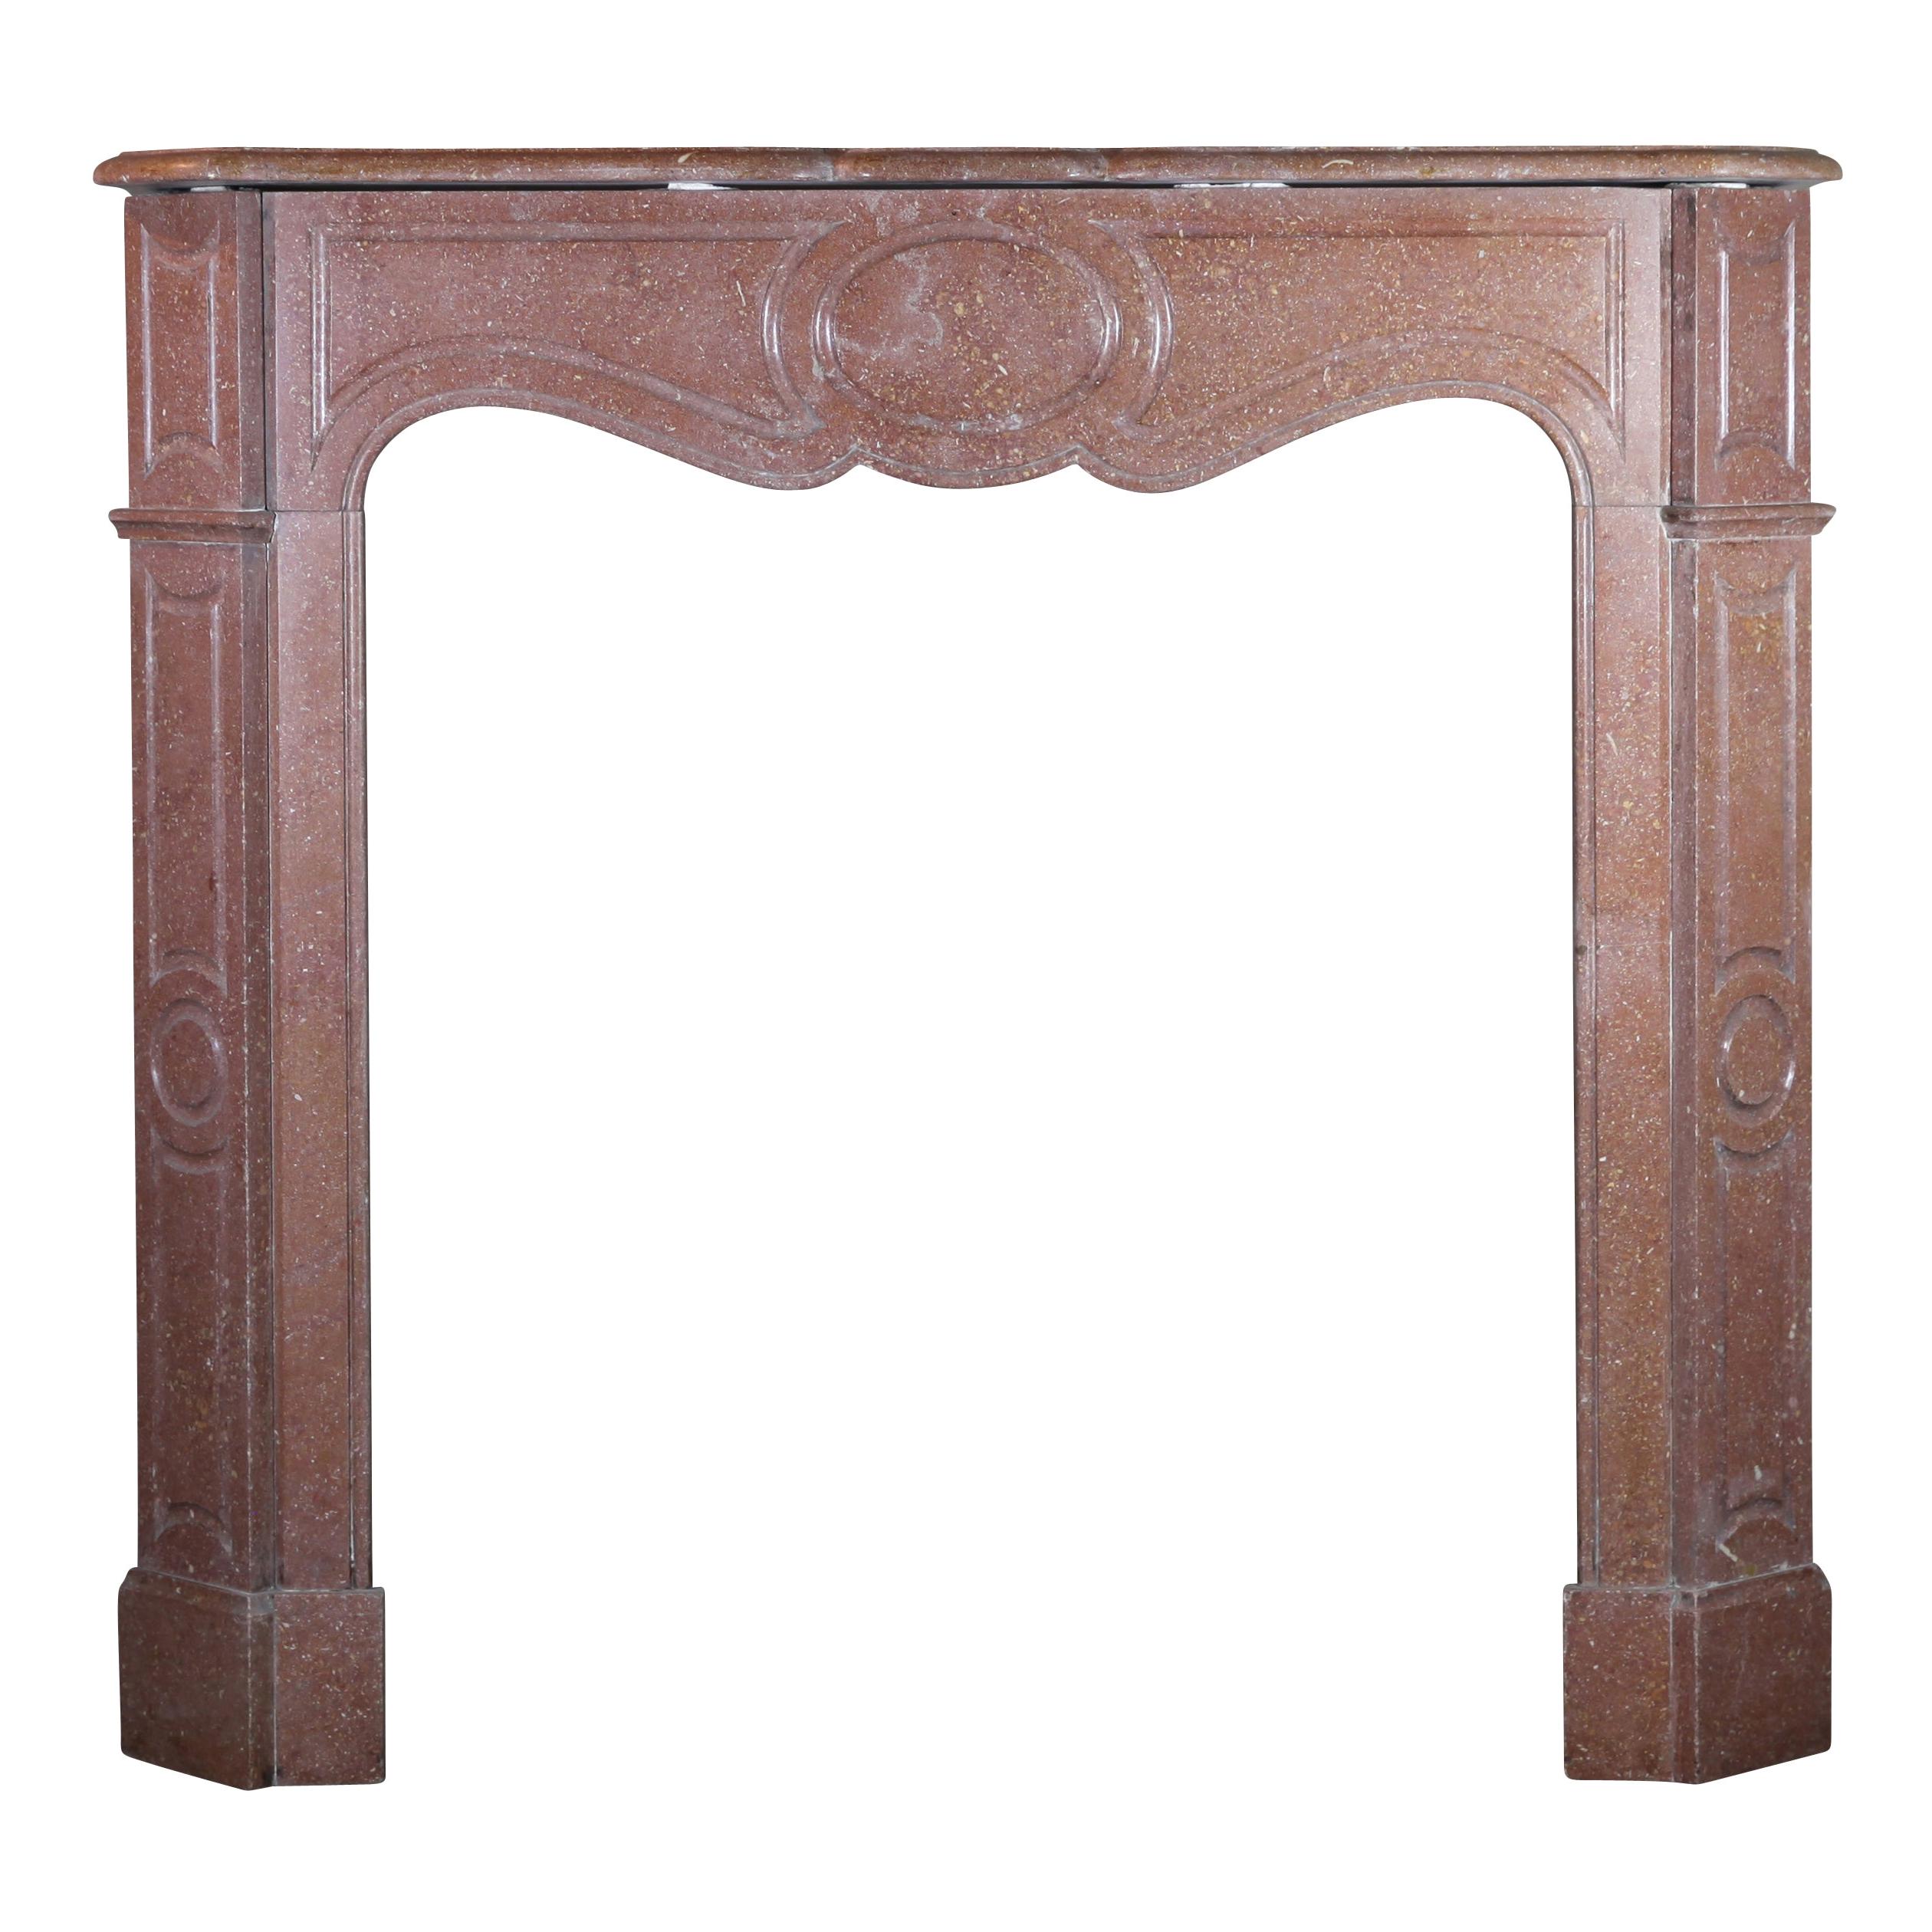 19th Century French Classic Petite Pompadour Marble Fireplace Surround